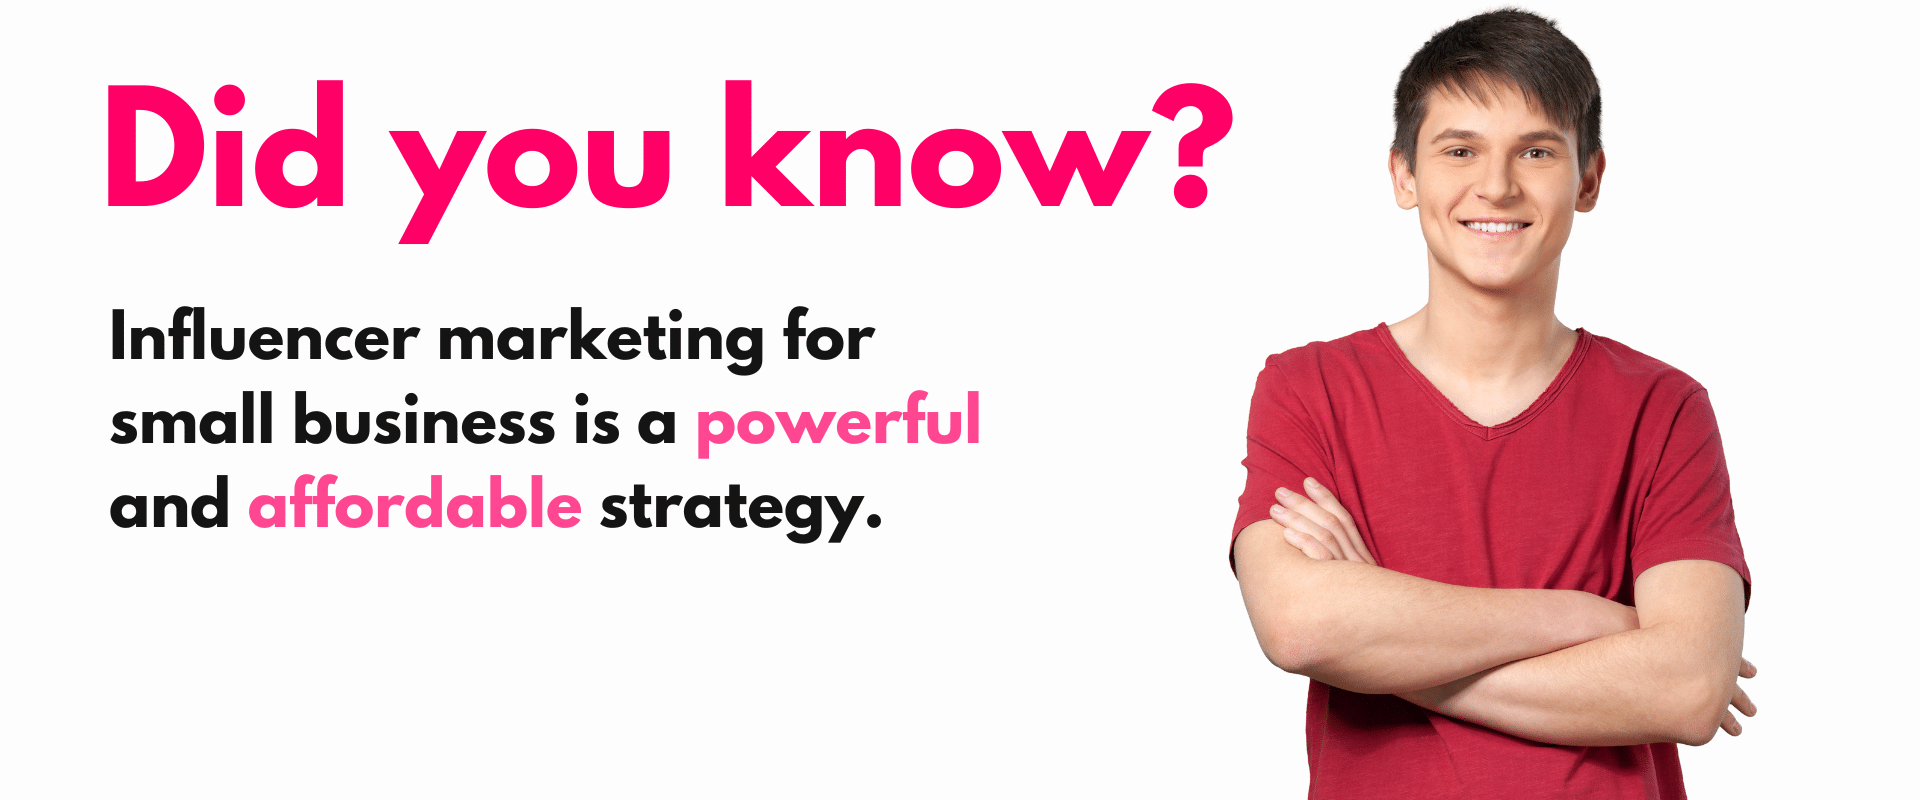 Influencer marketing for small business is a powerful and affordable strategy.